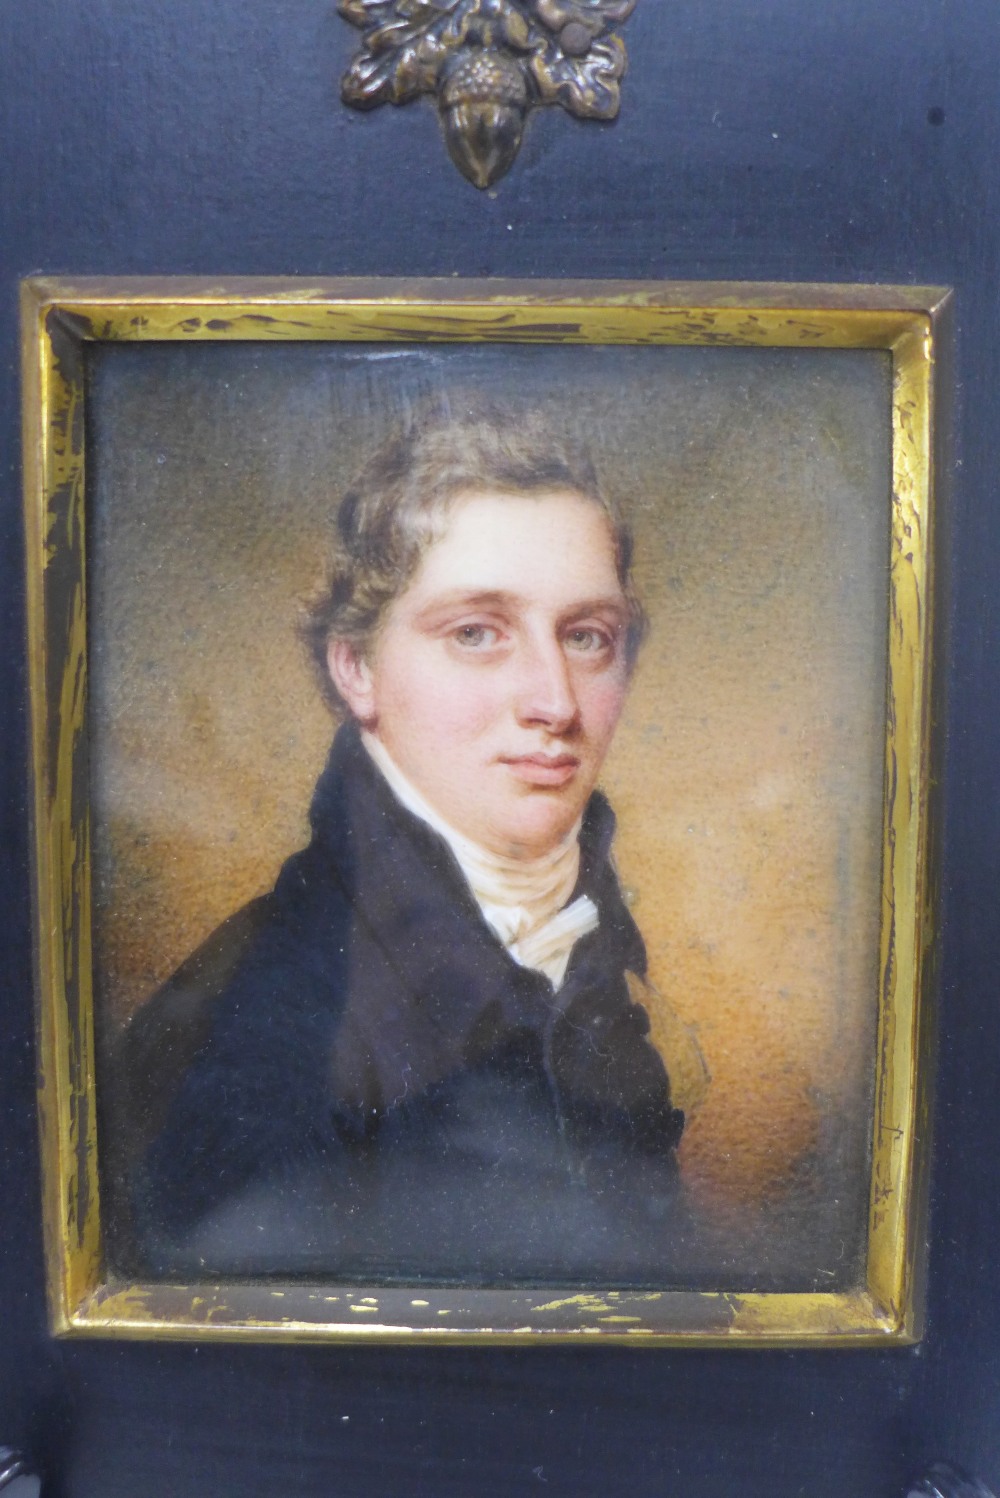 Four 19th century portrait miniatures, painted on ivory, to include Alexander Cunningham by - Image 3 of 5